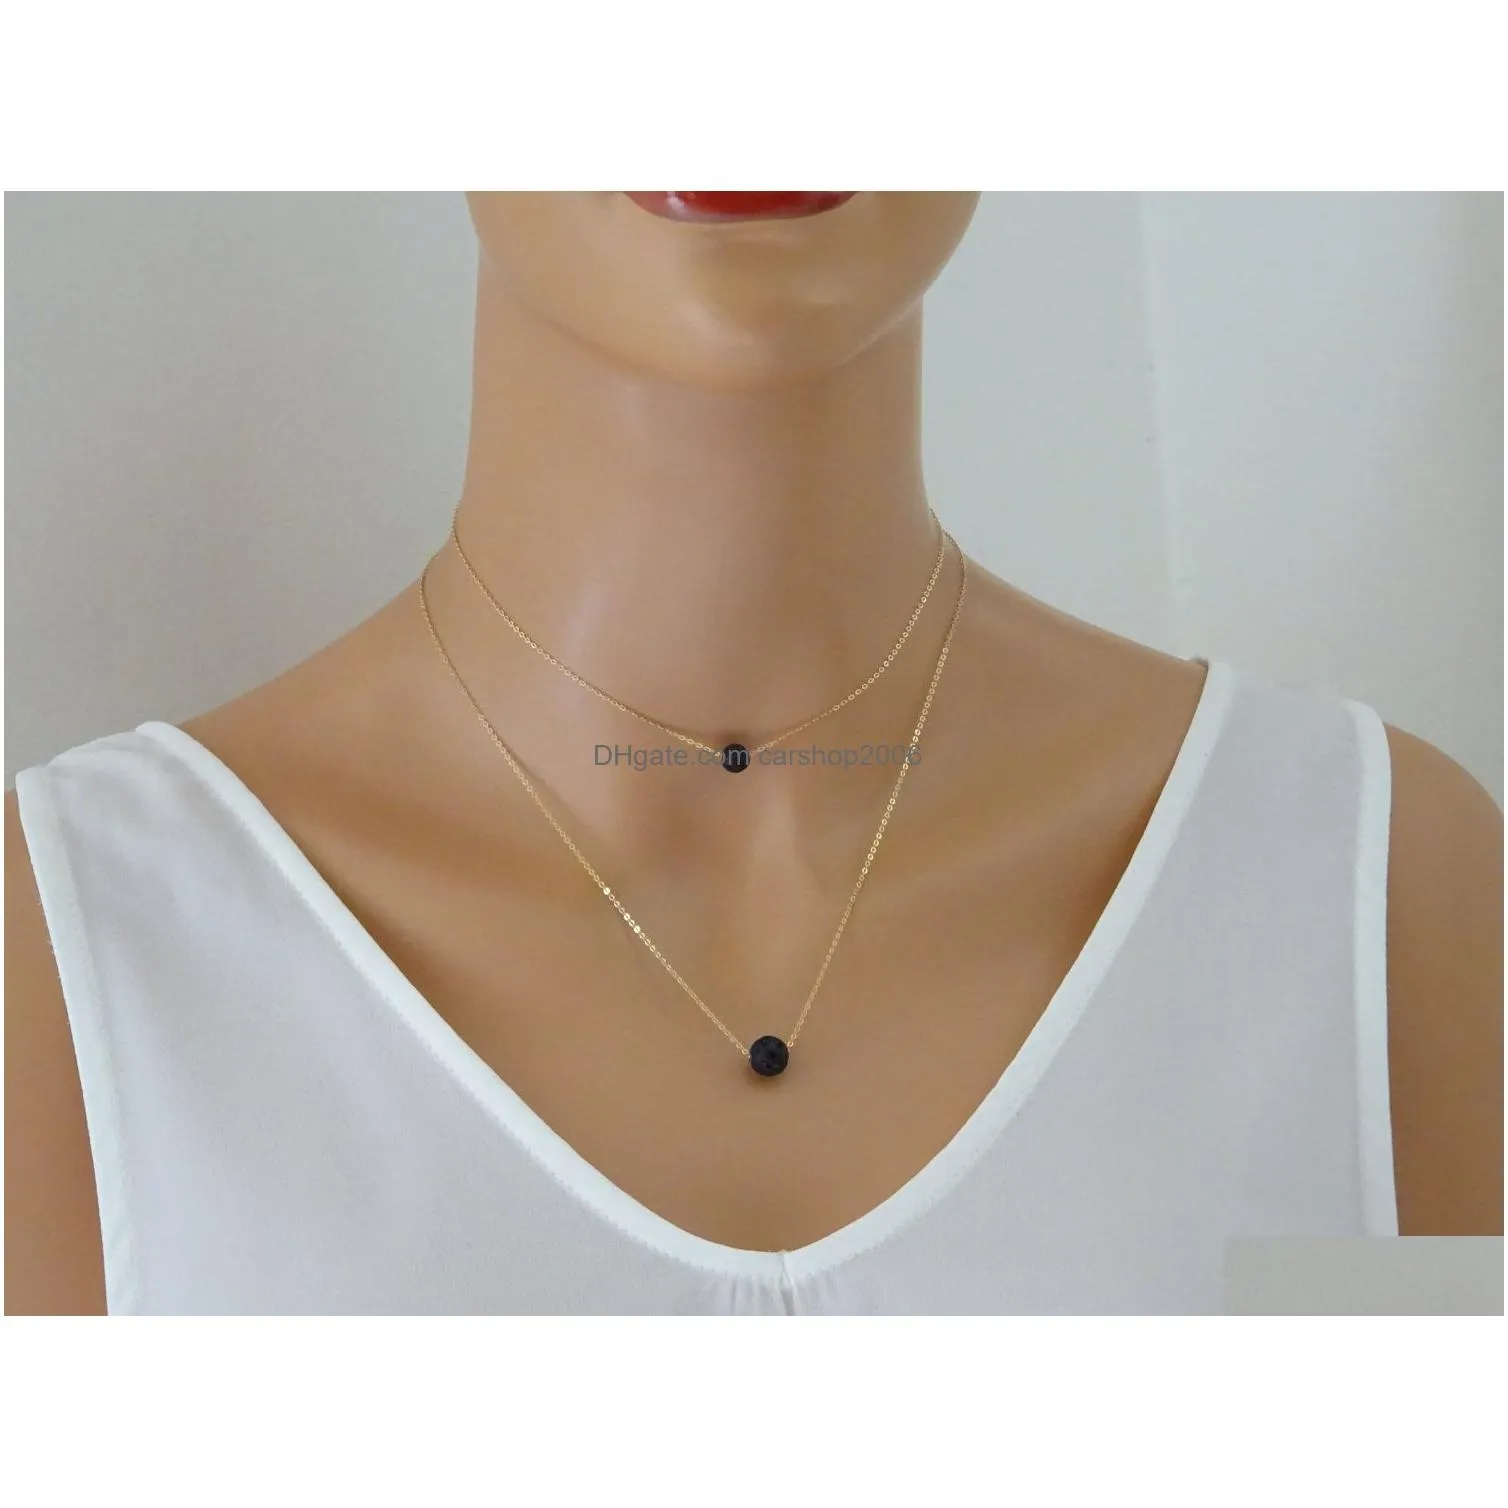 4 styles natural black lava stone necklace silver gold color heart aromatherapy essential oil diffuser necklace for women jewelry